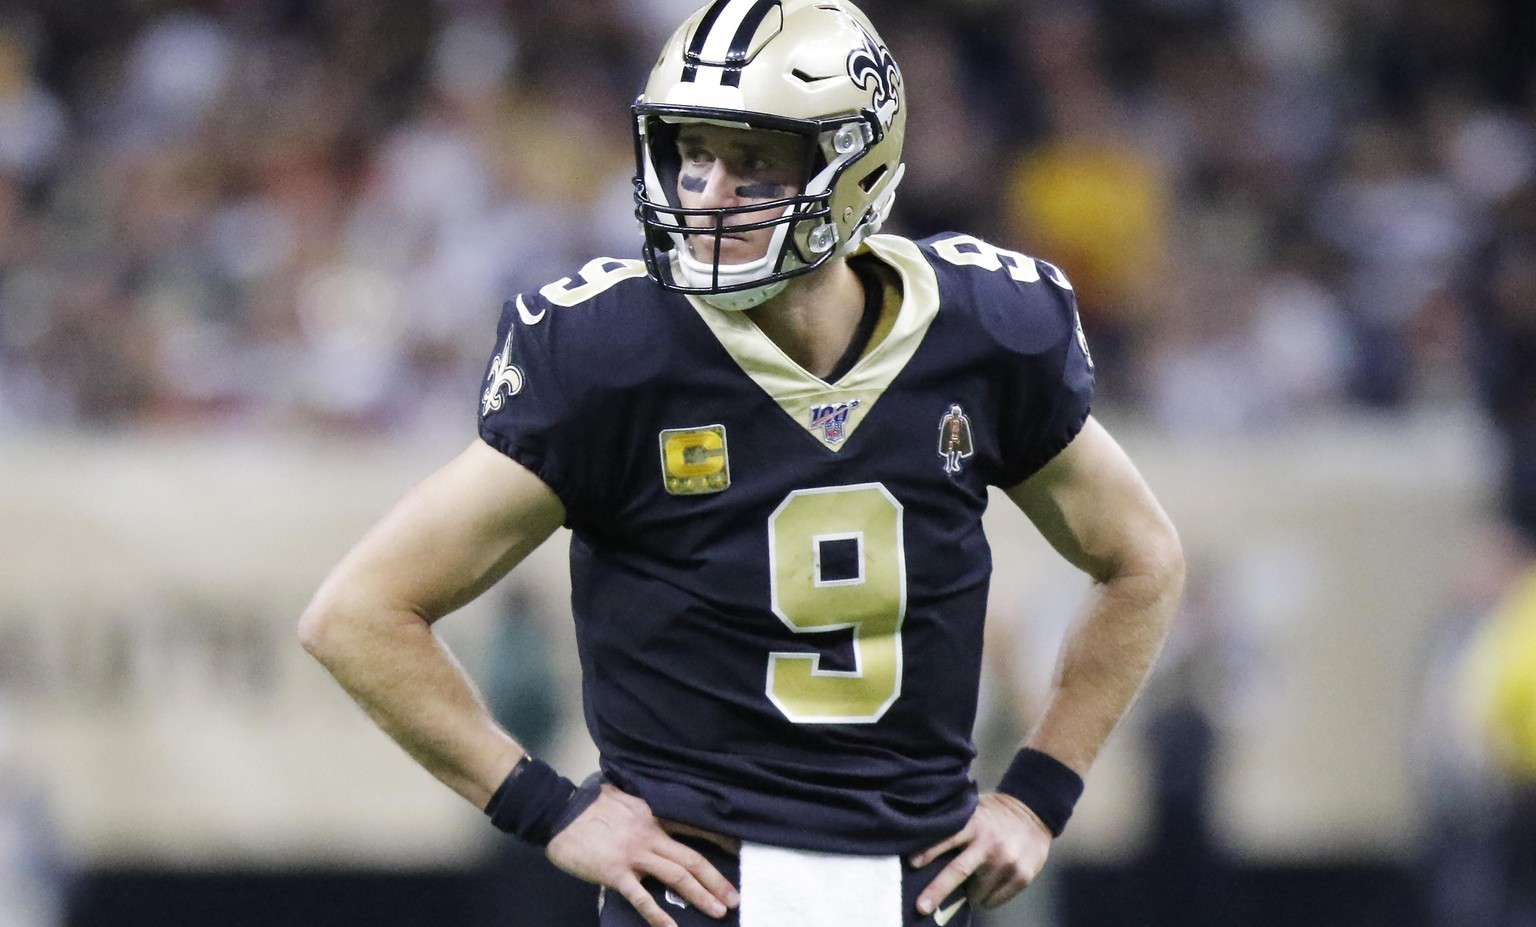 November 10, 2019, New Orleans, LOUISIANA, U.S: New Orleans Saints quarterback Drew Brees in between plays against the Atlanta Falcons in New Orleans, Louisiana USA on November 10, 2019. The Falcons b ...